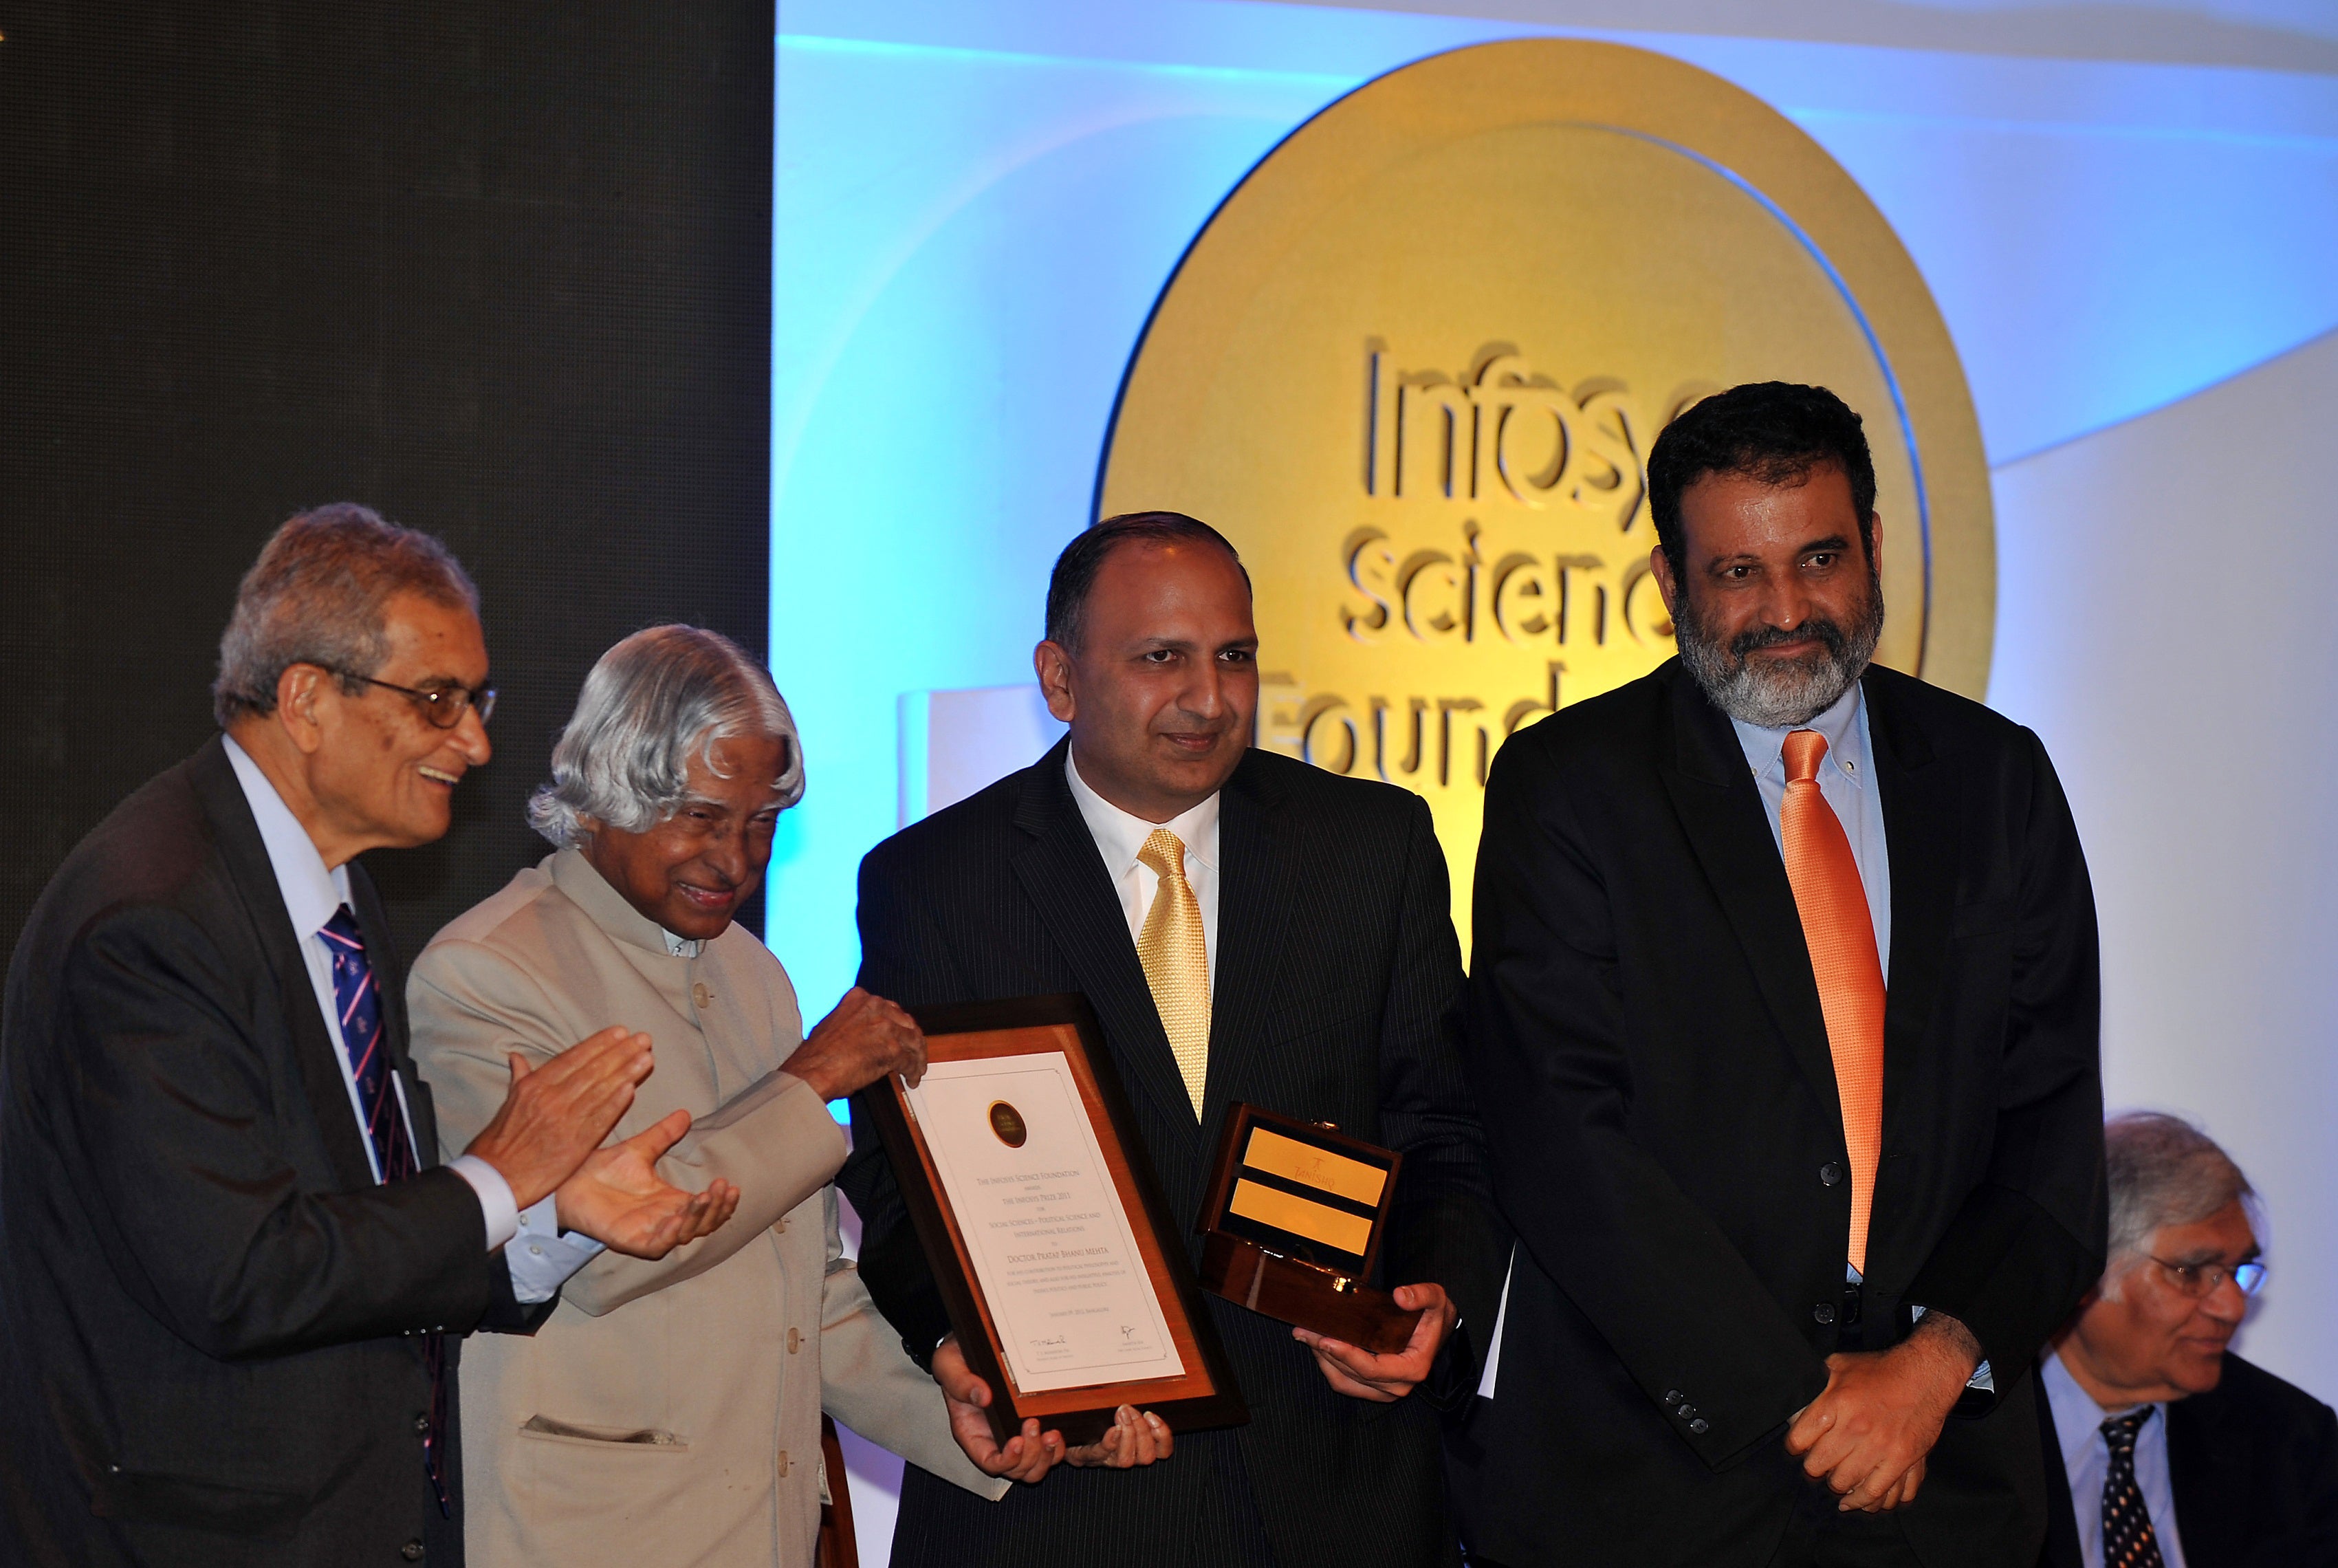 Pratap Bhanu Mehta (second from right) receiving an award from India’s former president APJ Abdul Kalam in 2011